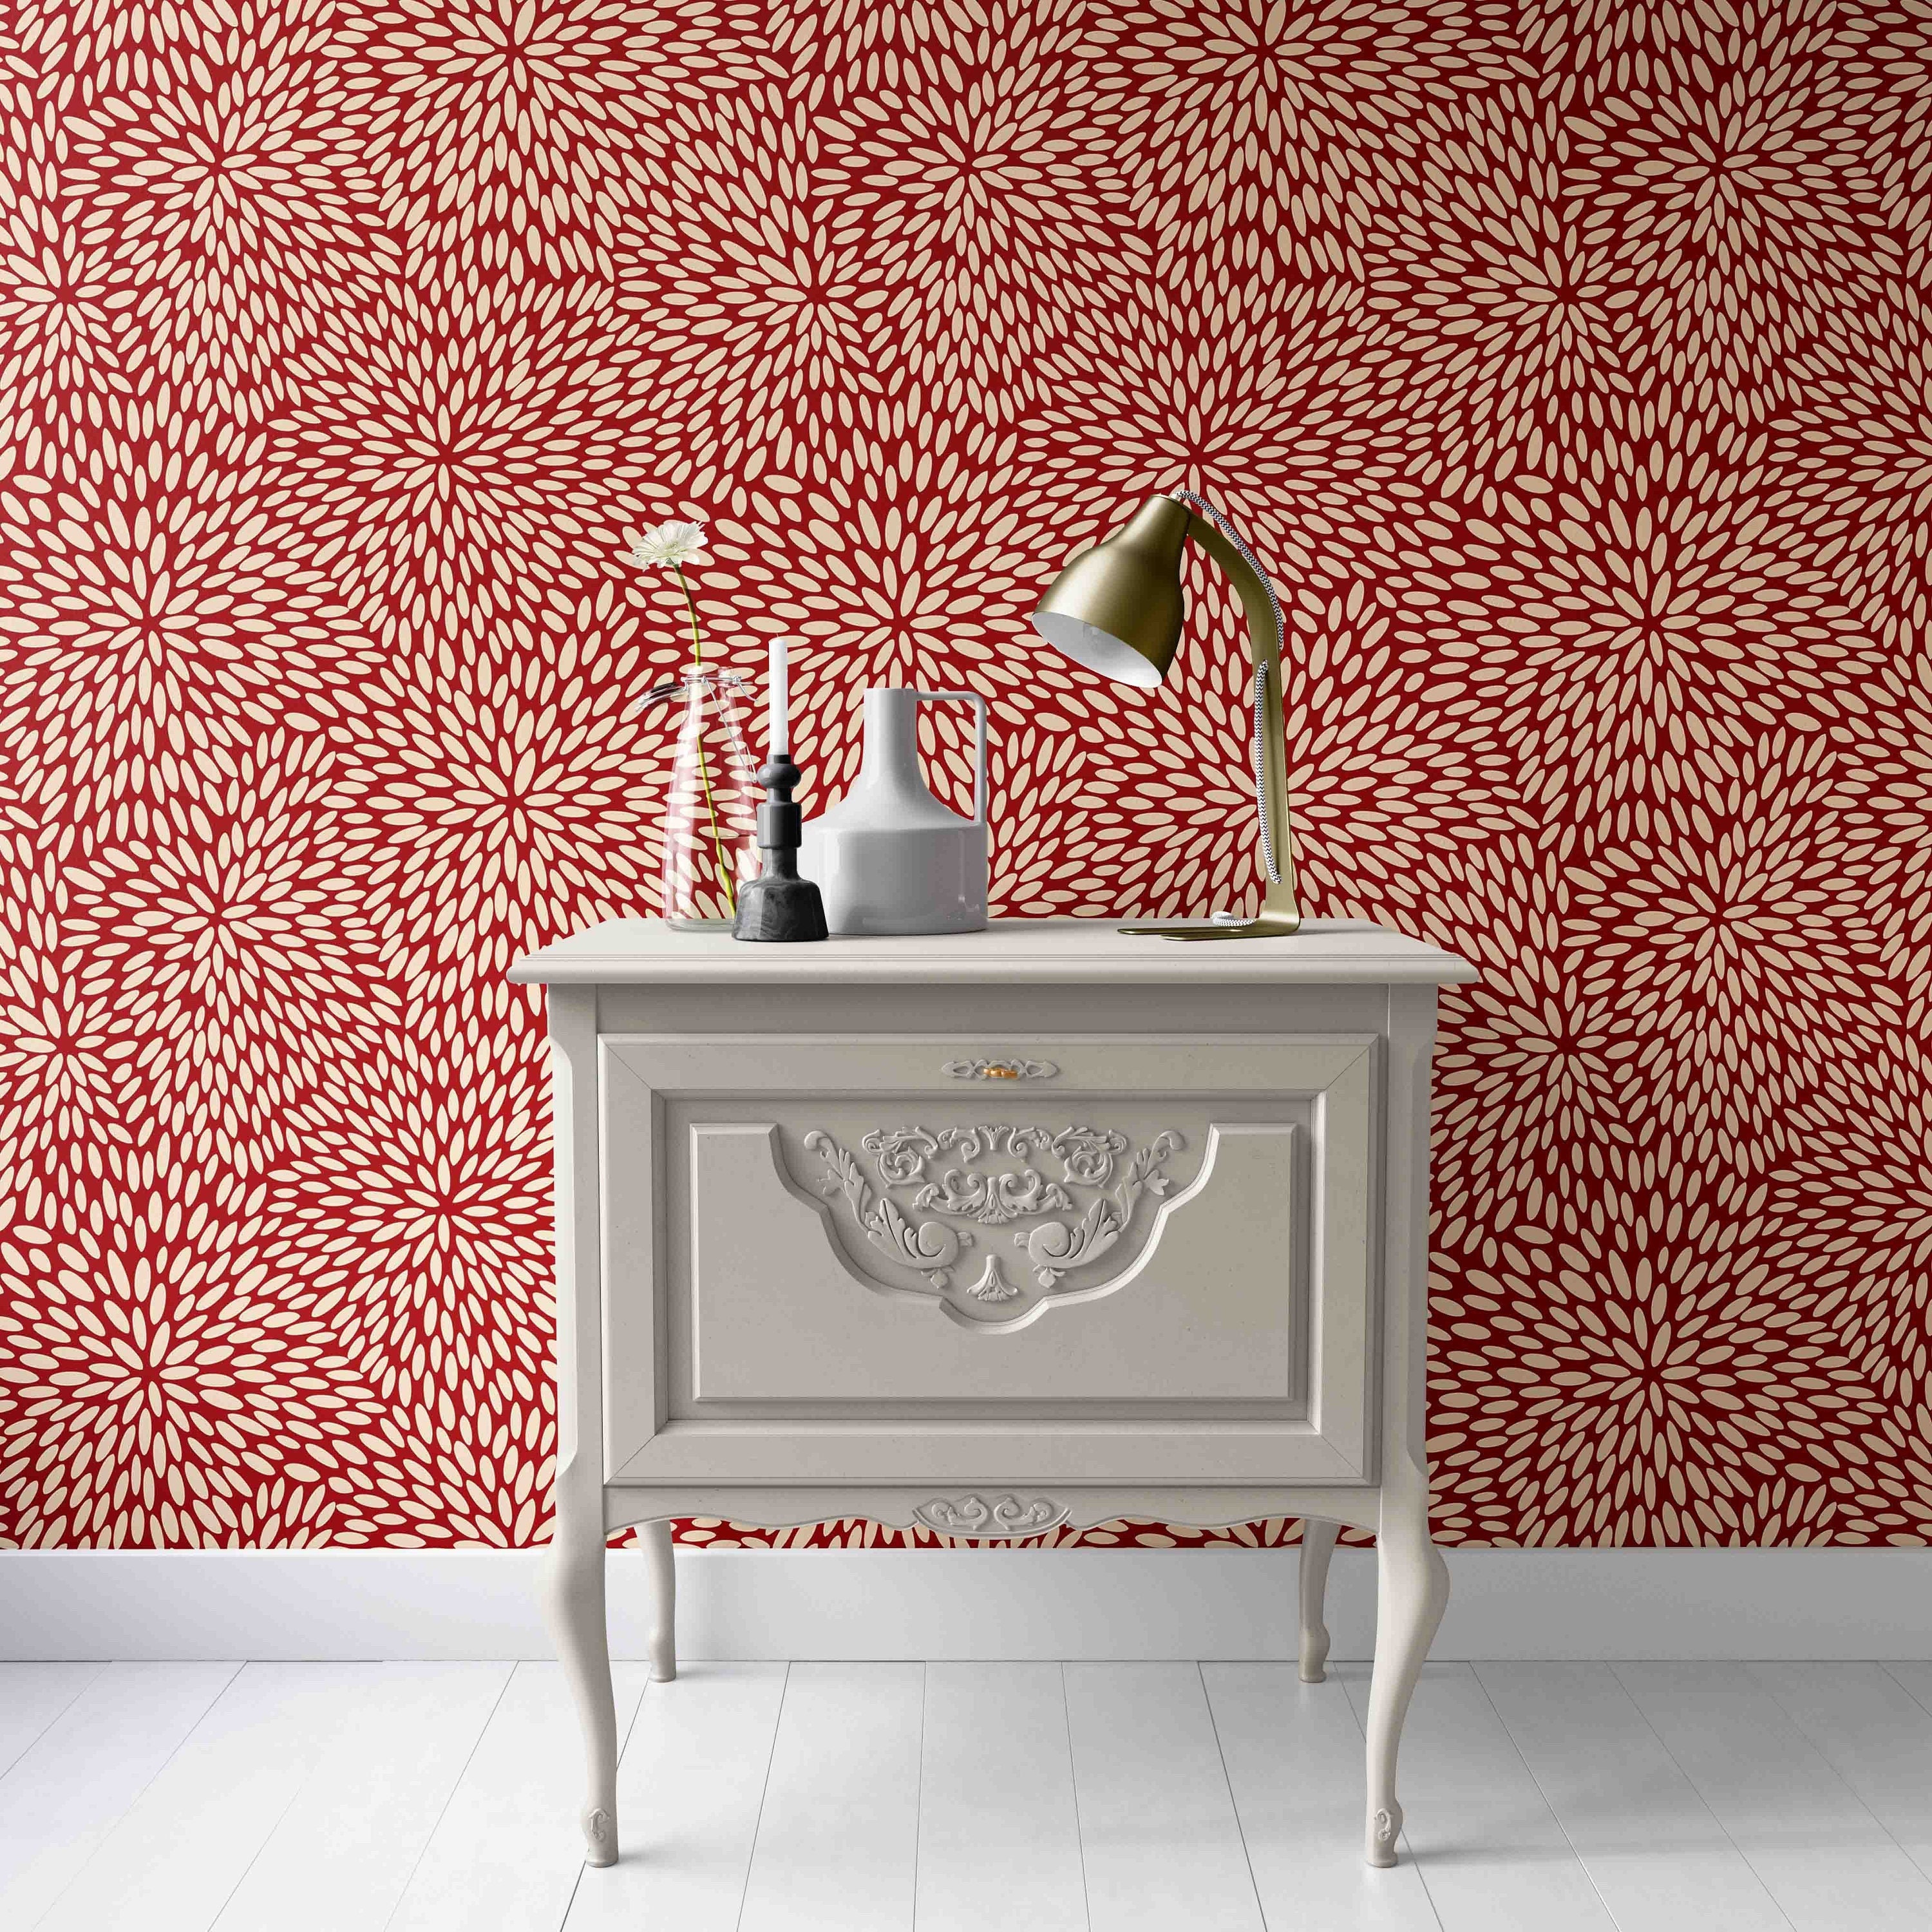 TOTAL HOME 29972 cm Red Contact Paper Shiny for Cabinets Red Wallpaper Peel  and Stick Countertops Self Adhesive Removable Waterproof Vinyl Wall Paper  for Kitchen Bedroom Bathroom Living Room Walls Self Adhesive